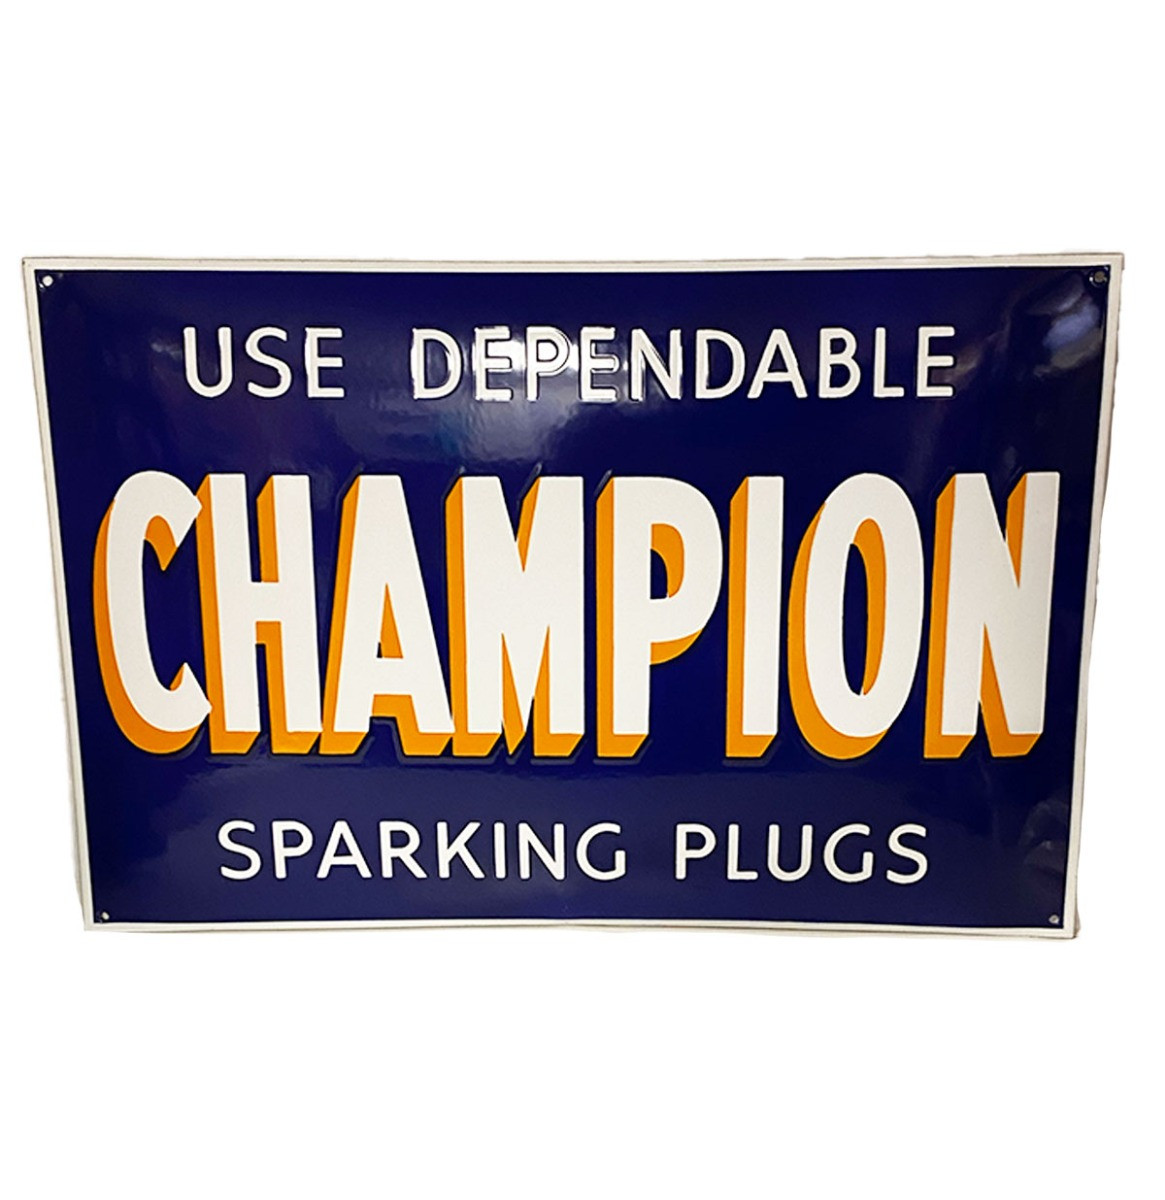 Champion Dependable Spark Plugs Emaille Bord - 60 x 40cm